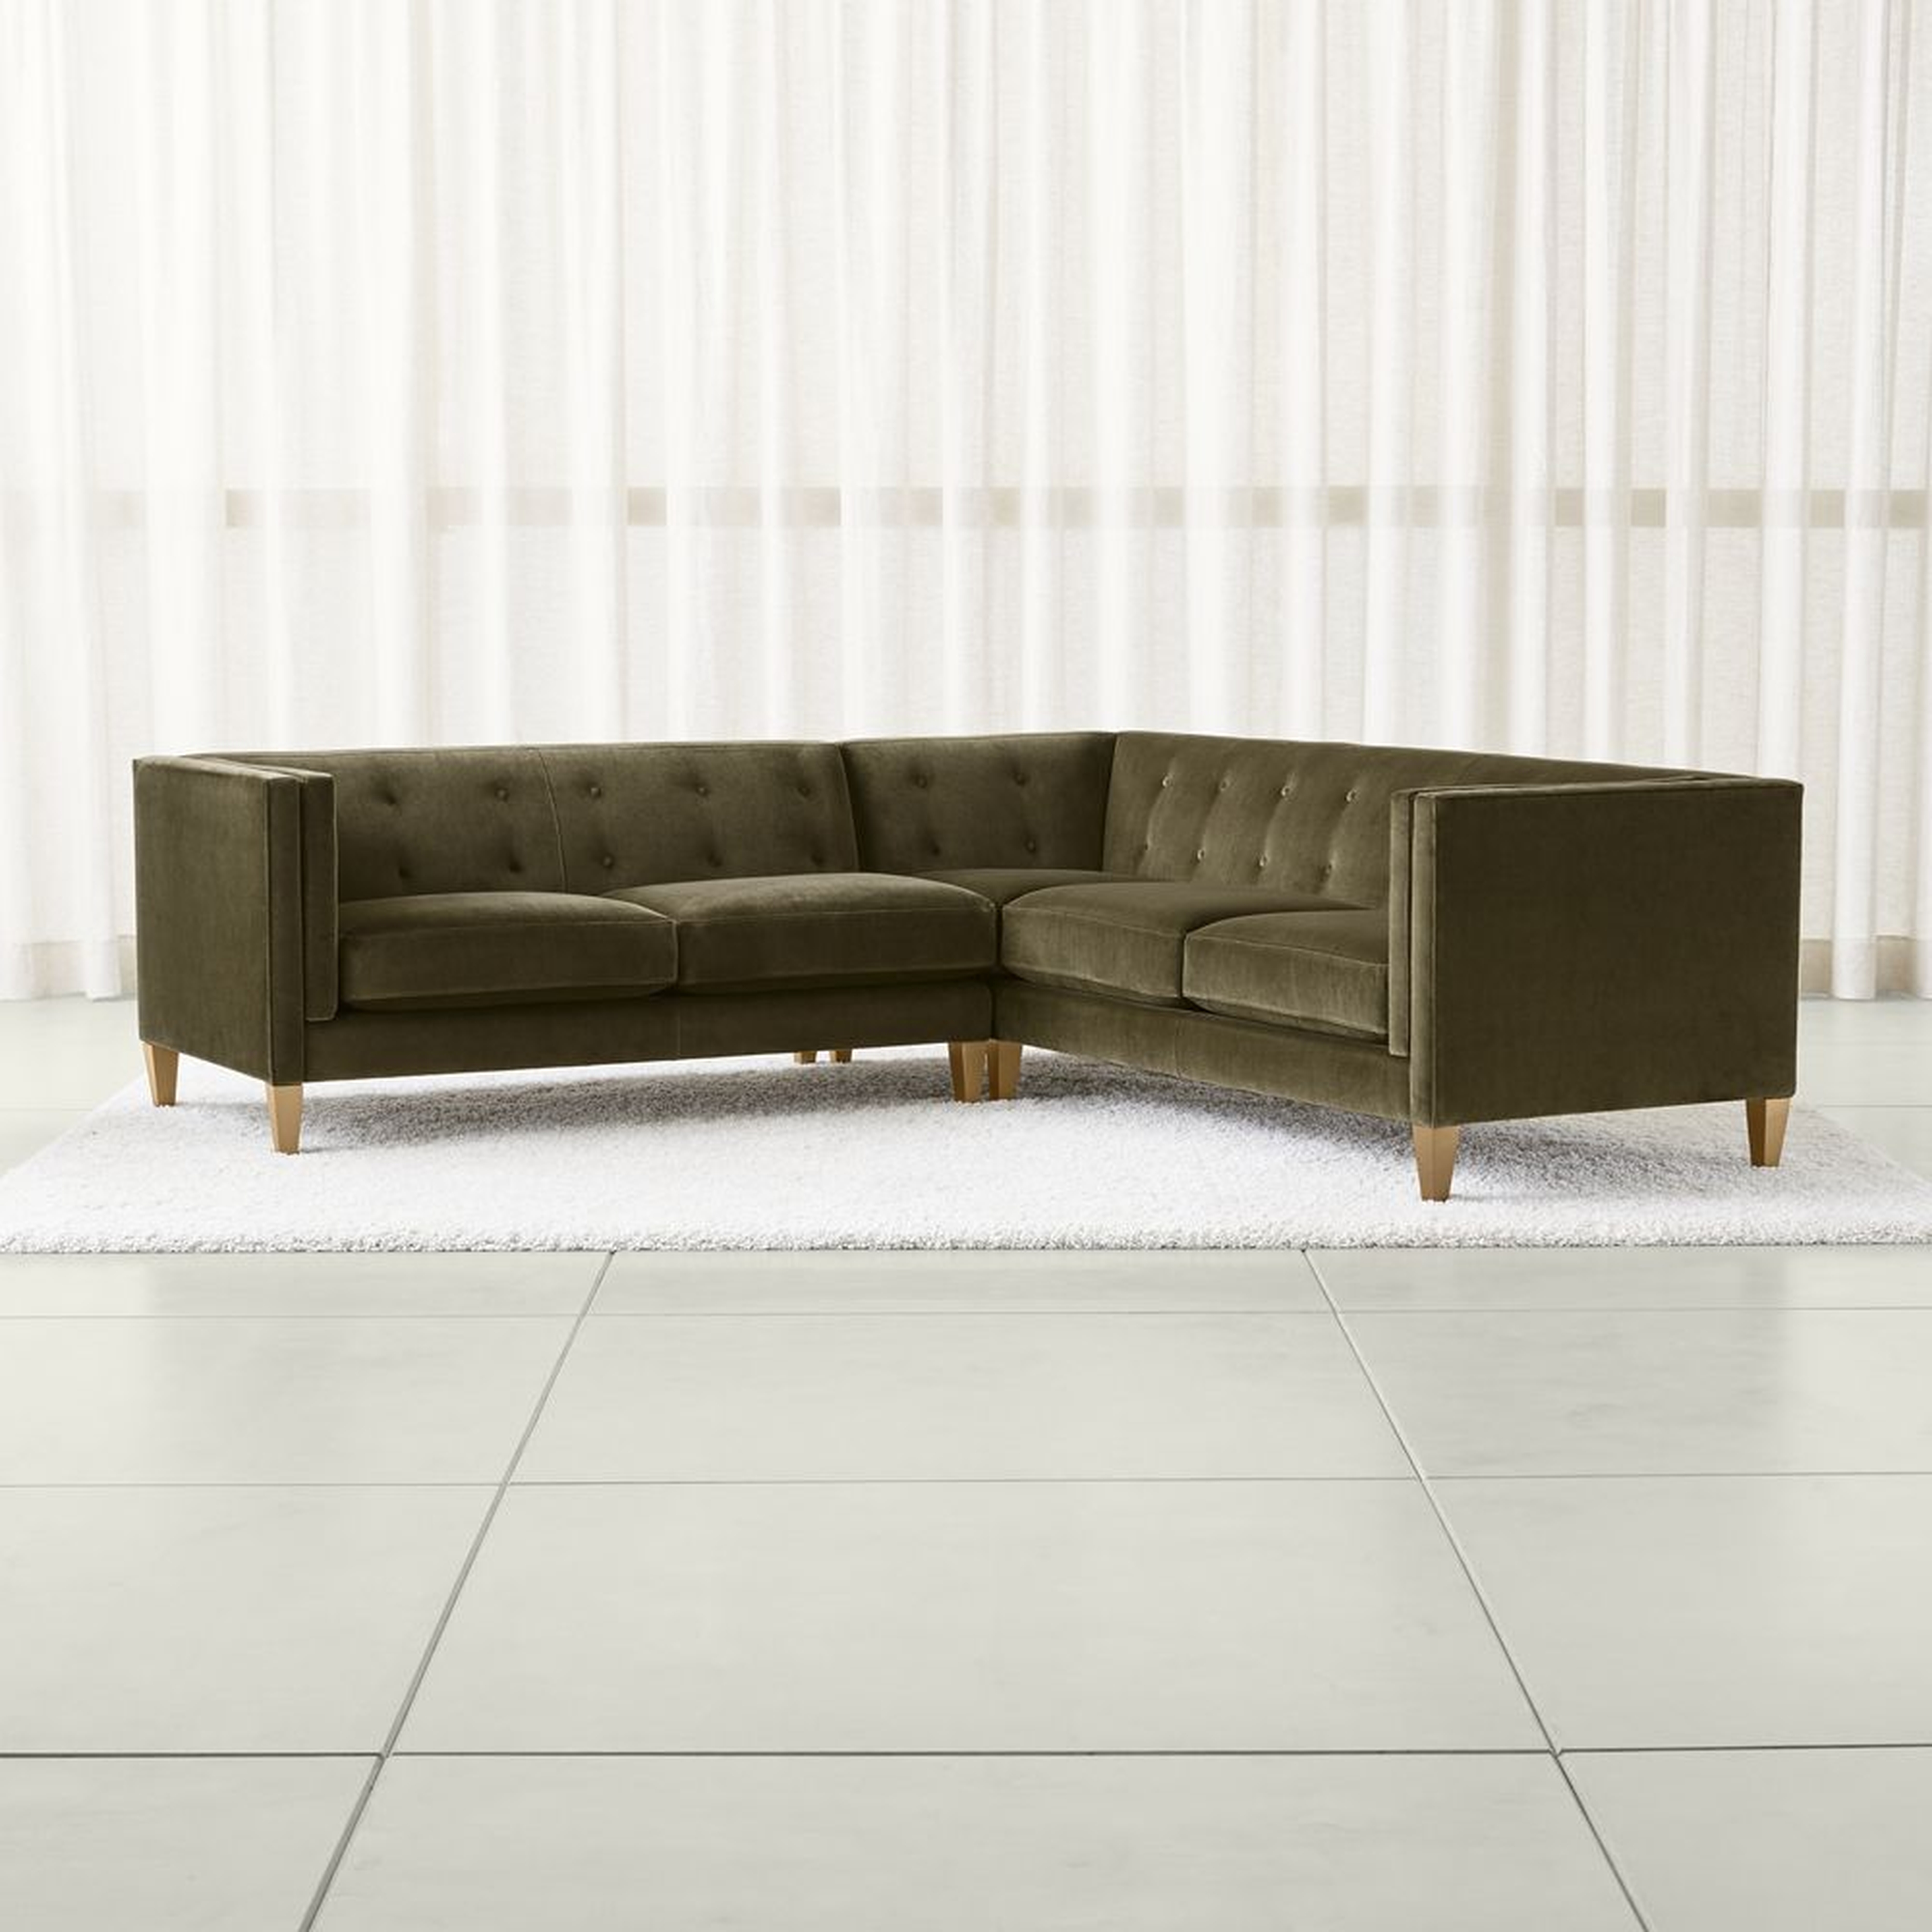 Aidan Velvet 2-Piece Right Arm Corner Tufted Sectional Sofa - Crate and Barrel